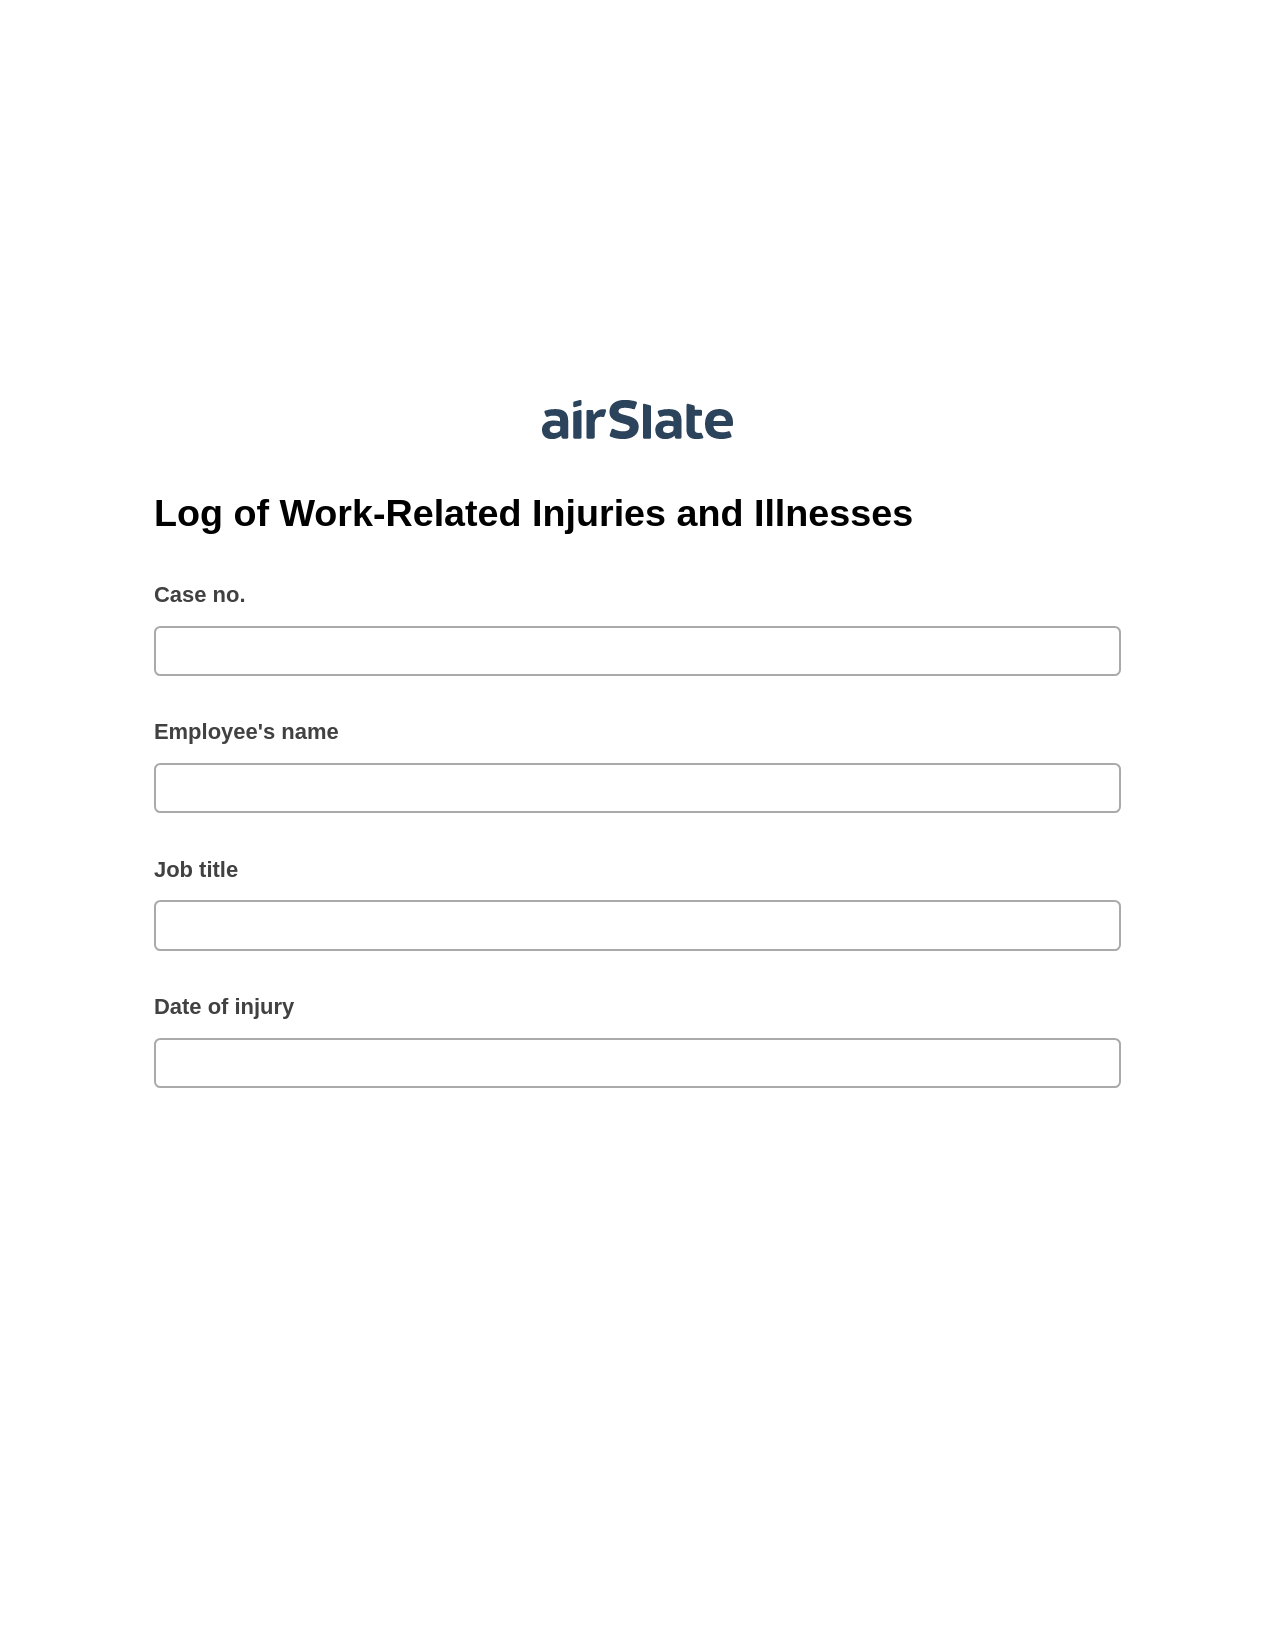 Multirole Log of Work-Related Injuries and Illnesses Pre-fill from Salesforce Records with SOQL Bot, System Bot - Create a Slate in another Flow, Dropbox Bot